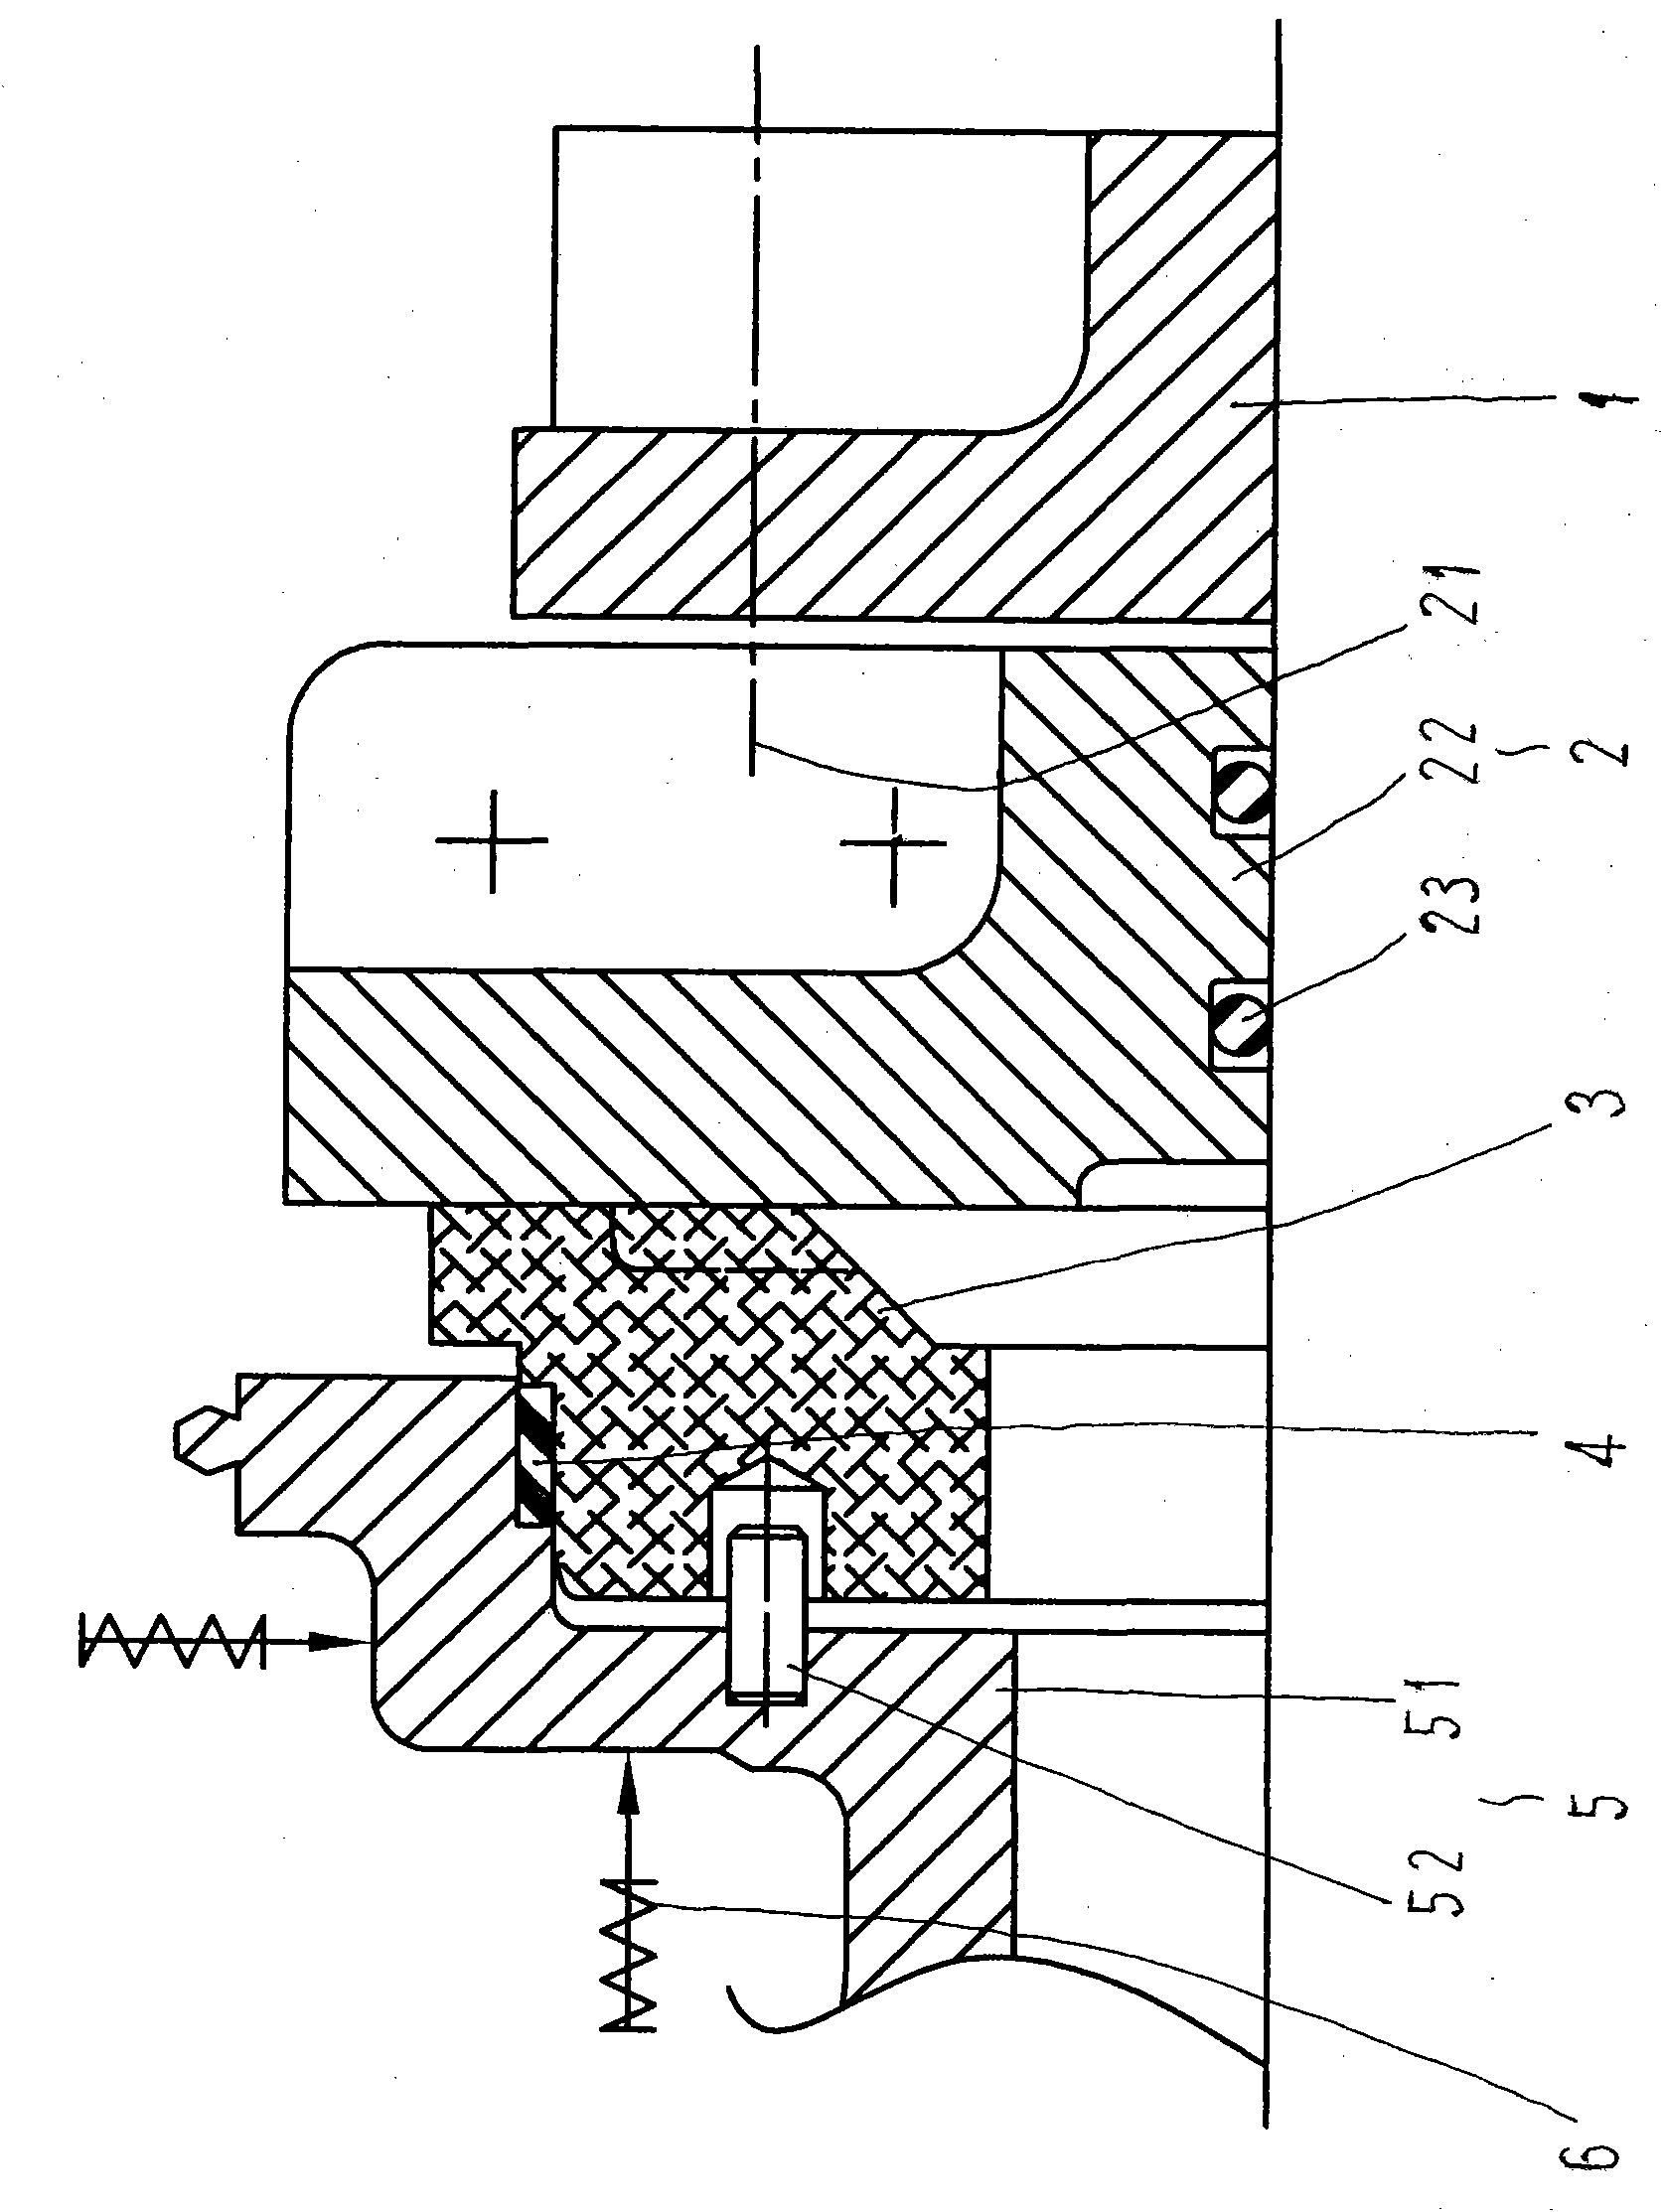 Novel static-ring structure of mechanical sealing device